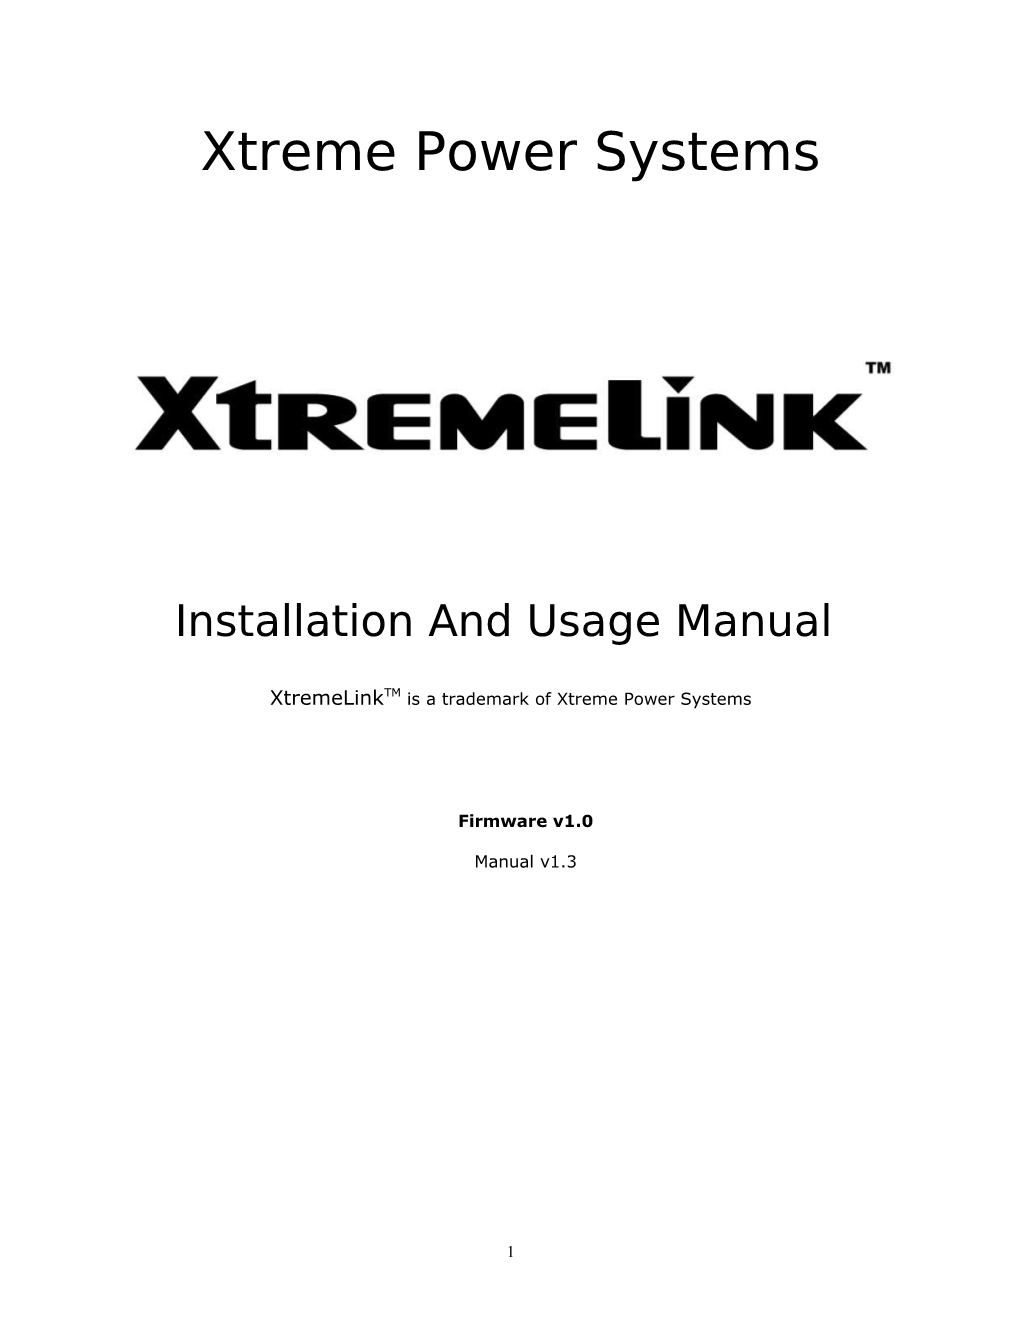 Installation and Usage Manual